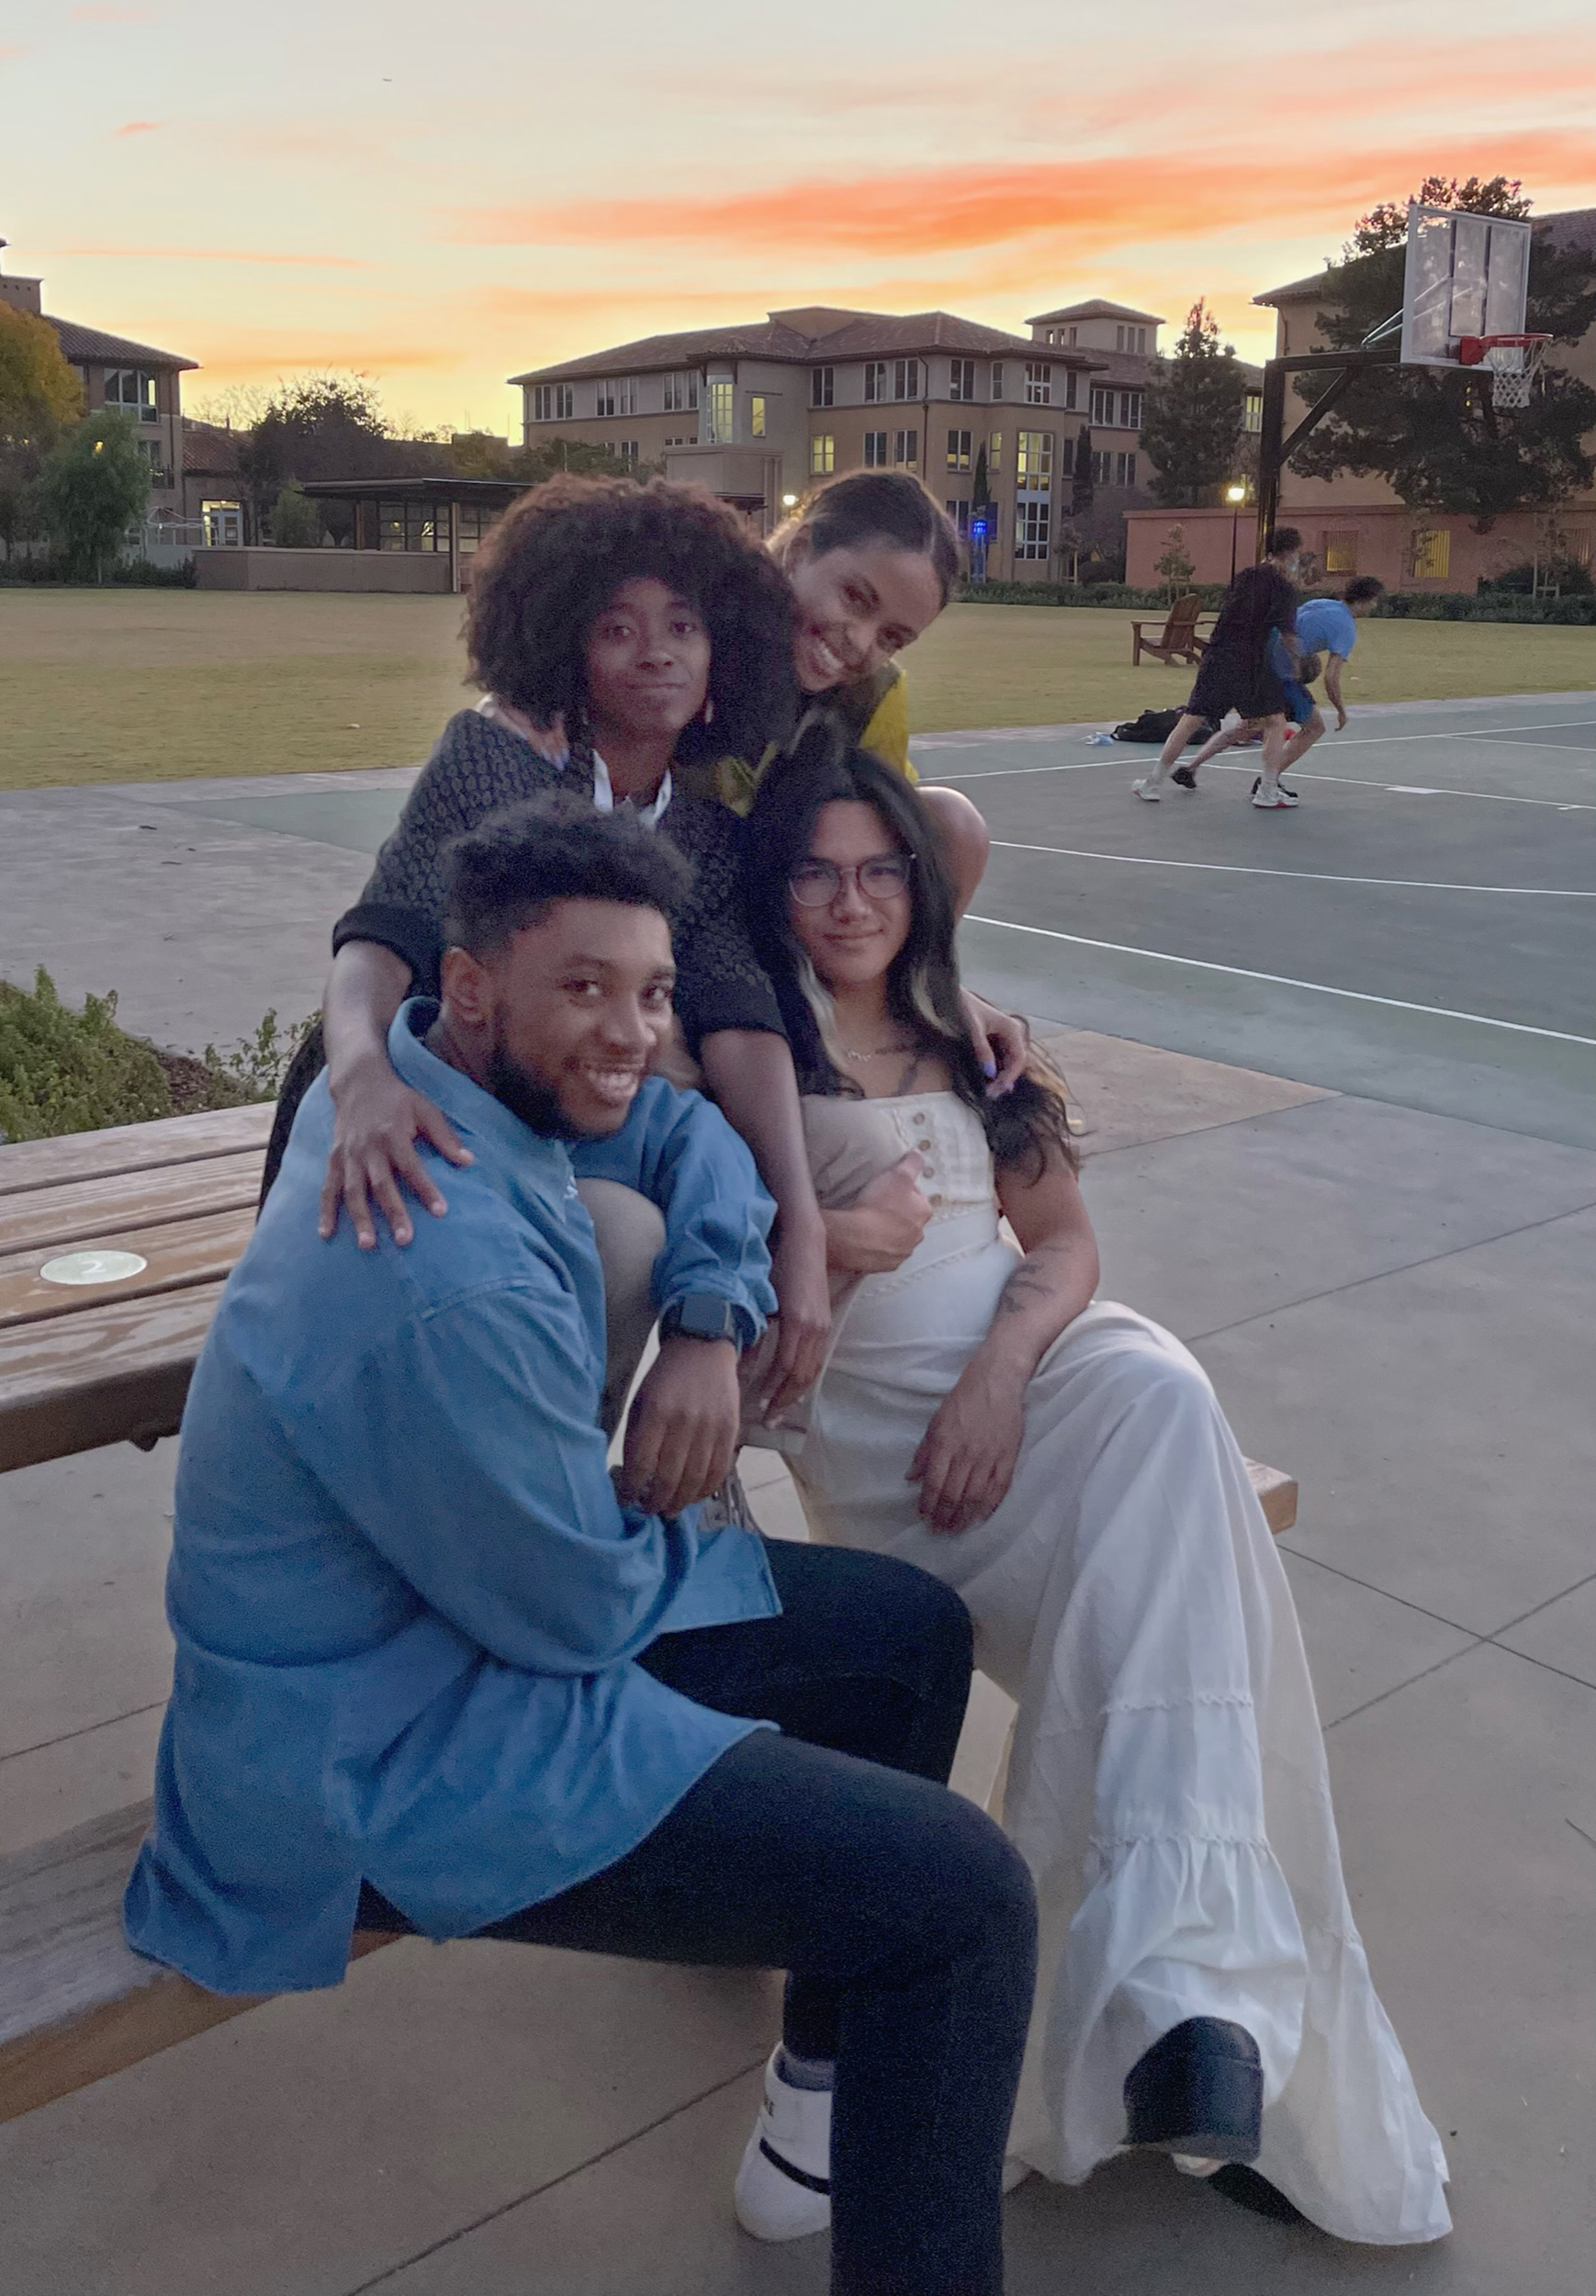 A group of four friends sit on a table in a basketball court, embracing each other. Behind them, the sunset creates orange clouds in contrast to the light blue sky.